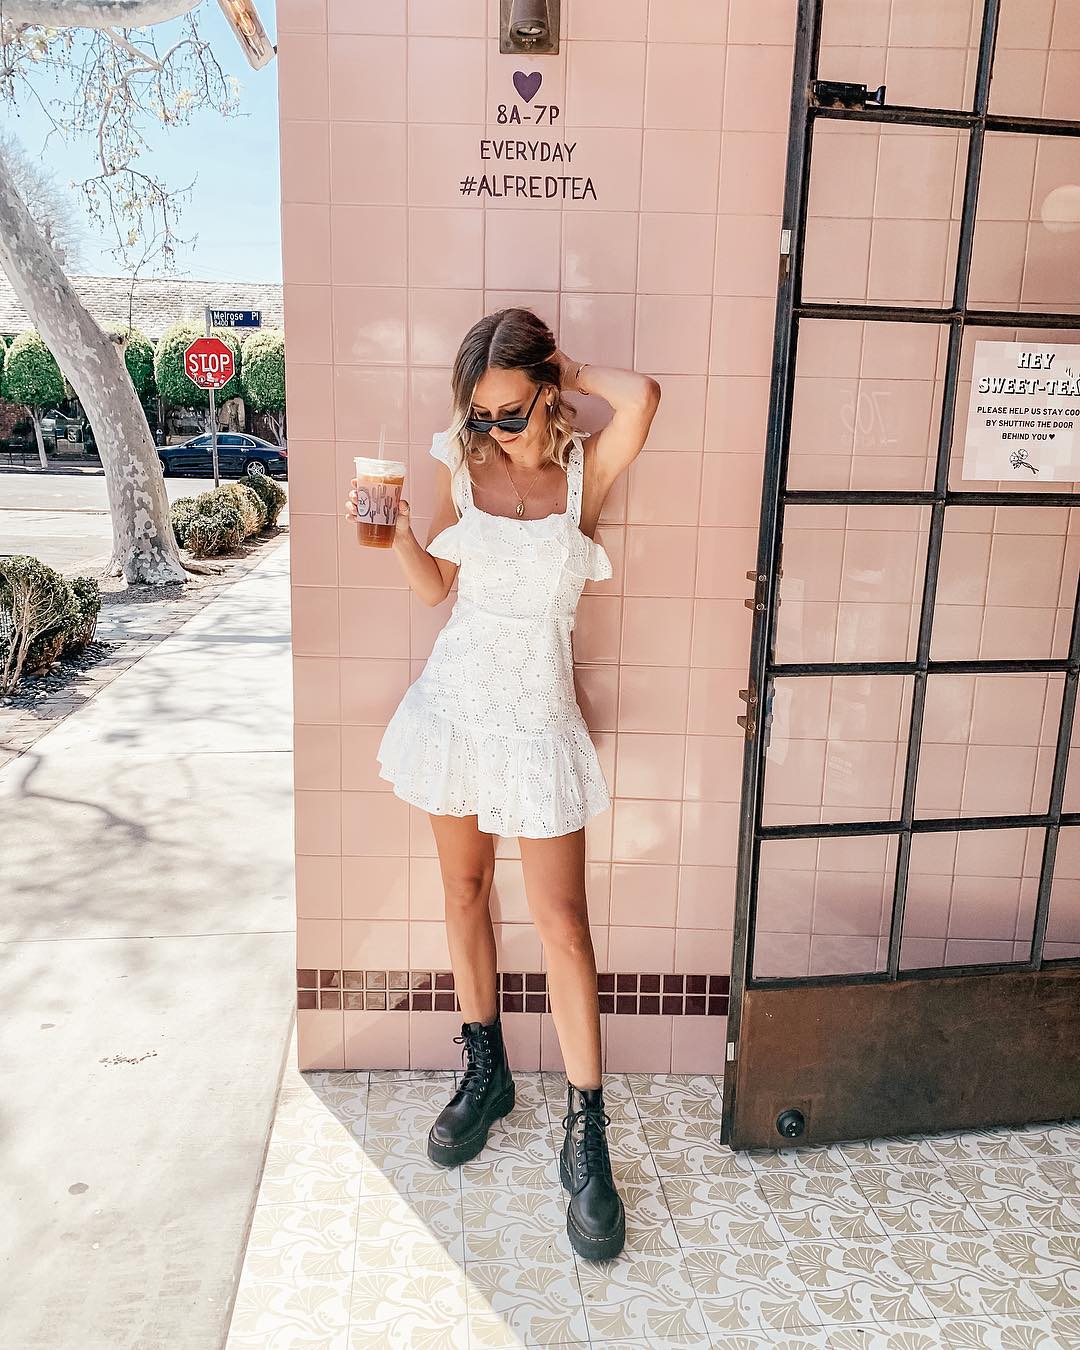 White Dress Outfits: Ideas for How to Wear a White Dress Like a Style Star